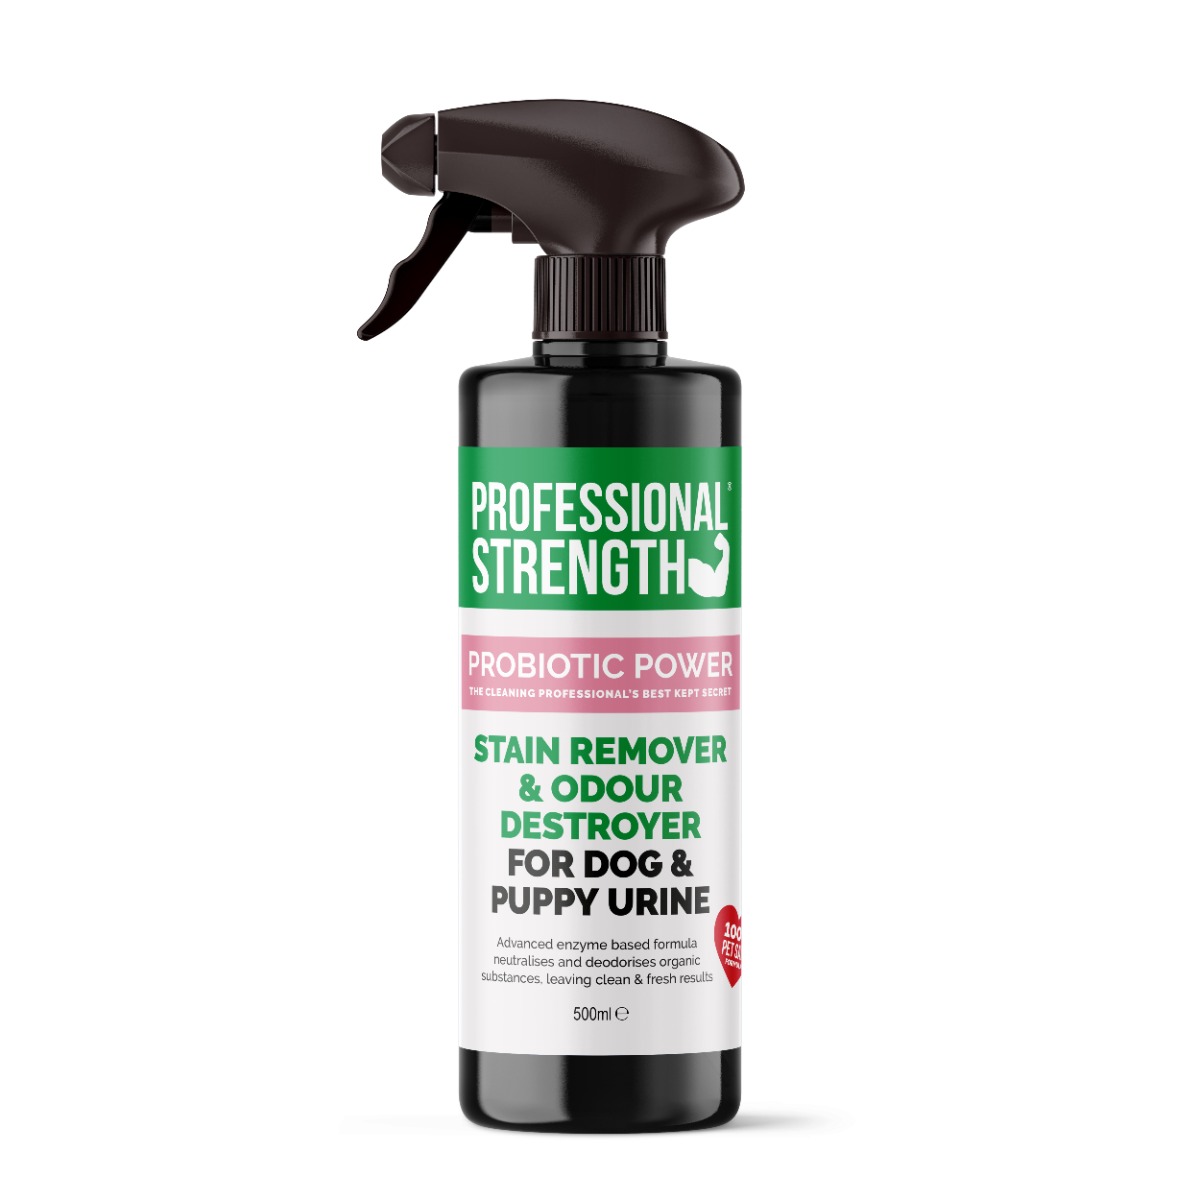 Professional Strength Dog & Puppy Urine Stain Remover & Odour Destroyer | StressNoMore